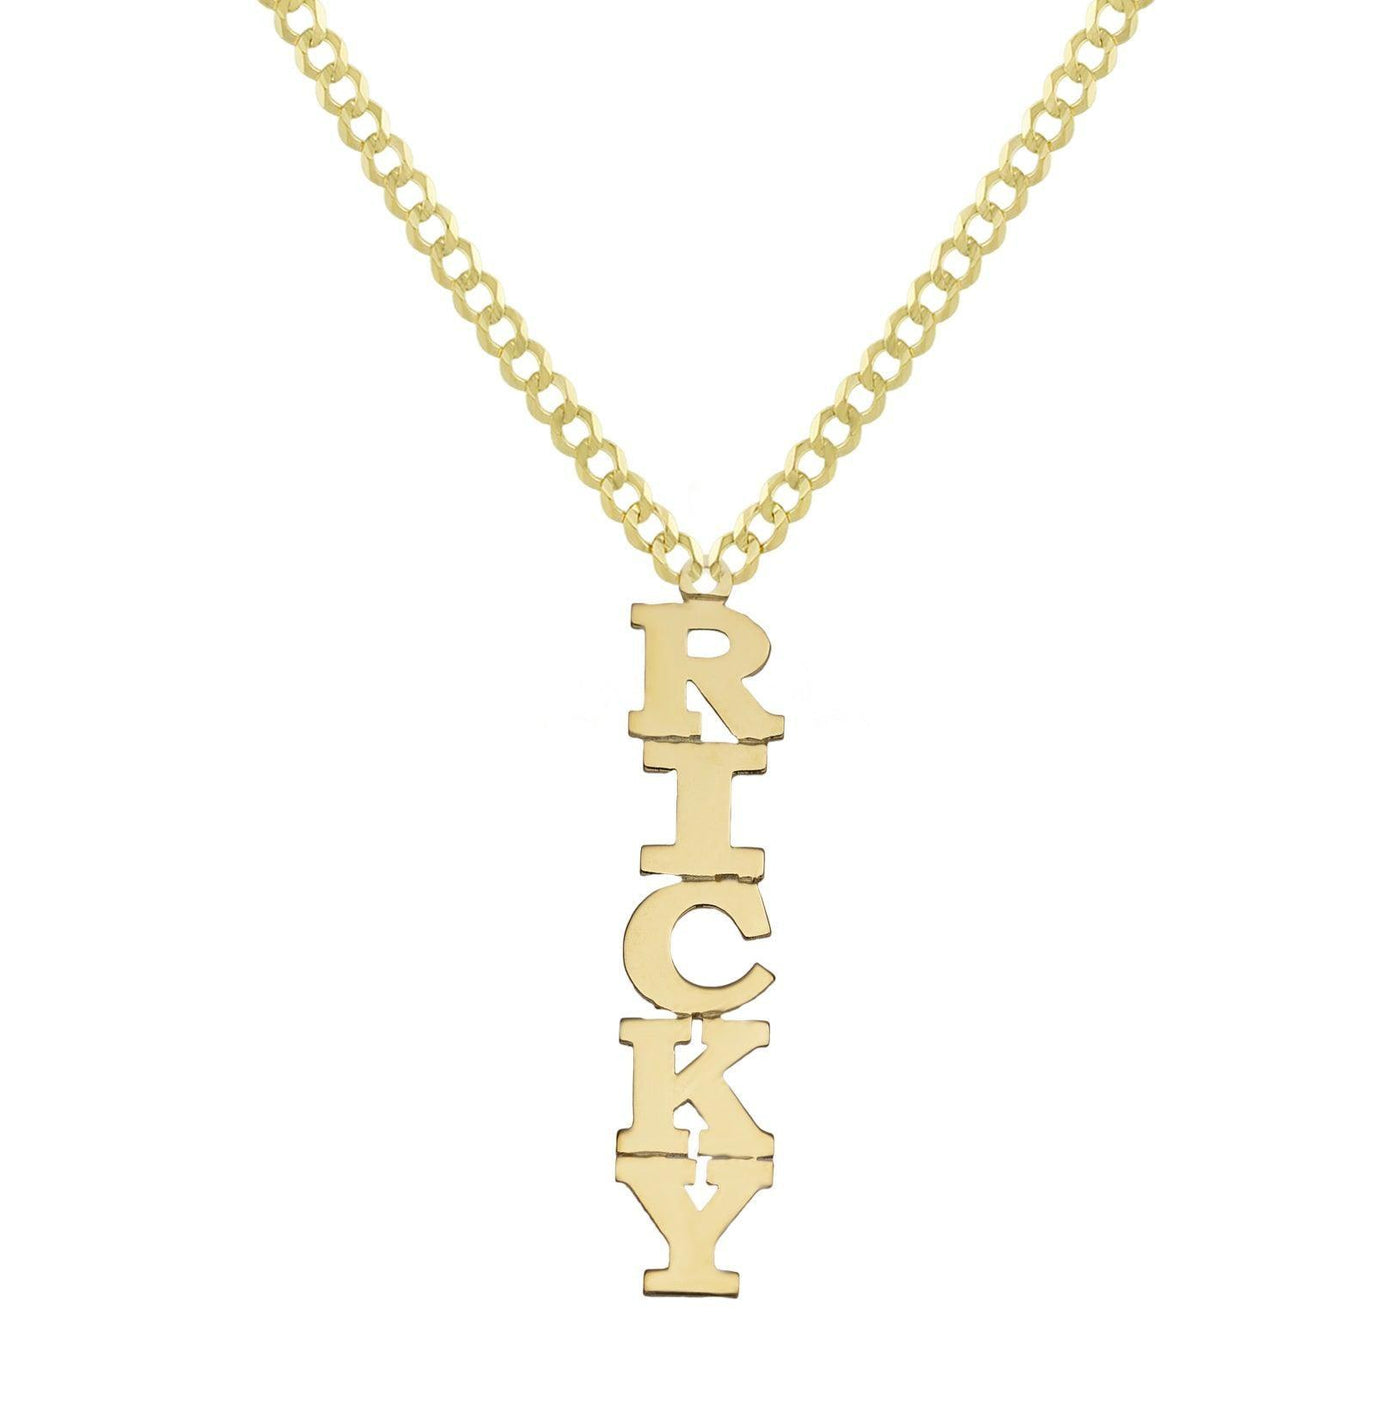 Ladies Vertical Name Plate Necklace 14K Gold - Style 20 - bayamjewelry